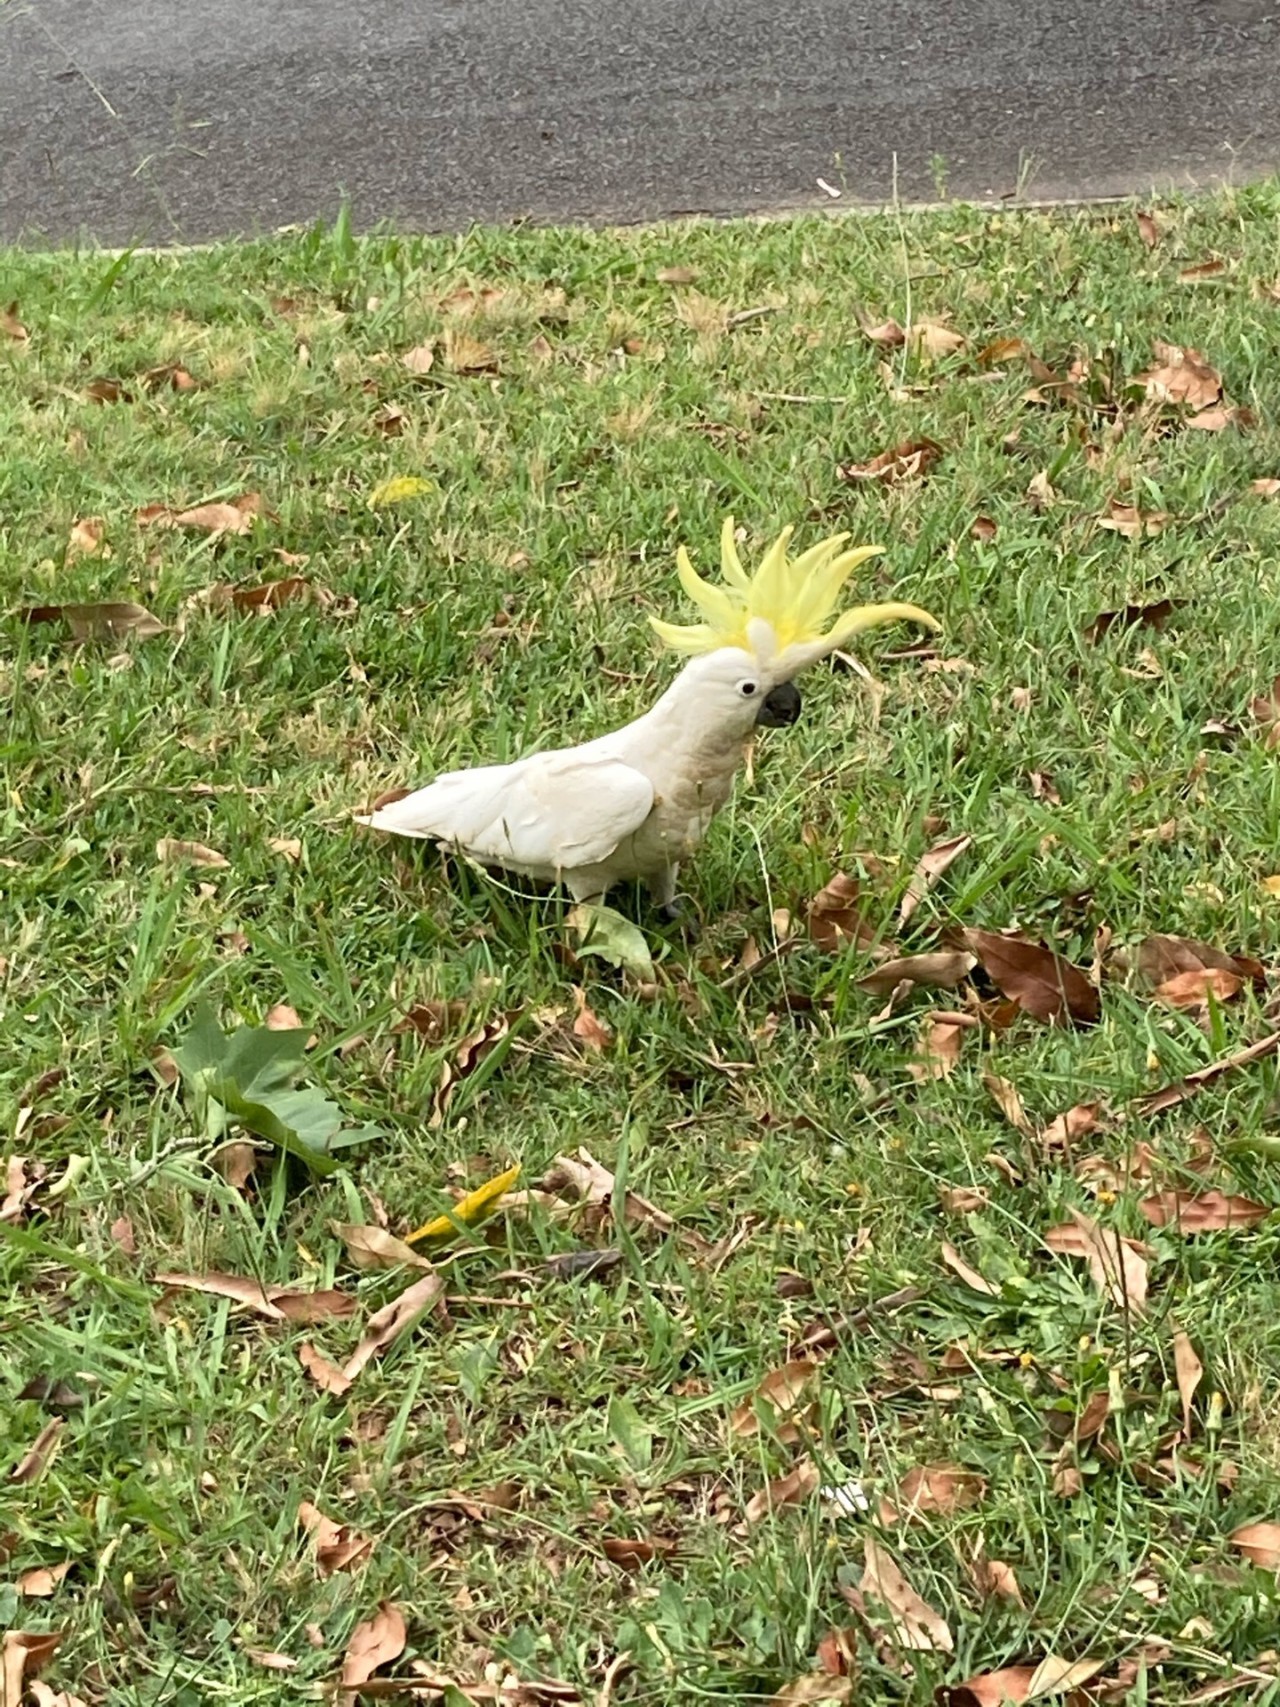 This cocky was walking around flaring its crest while pecking for grass 